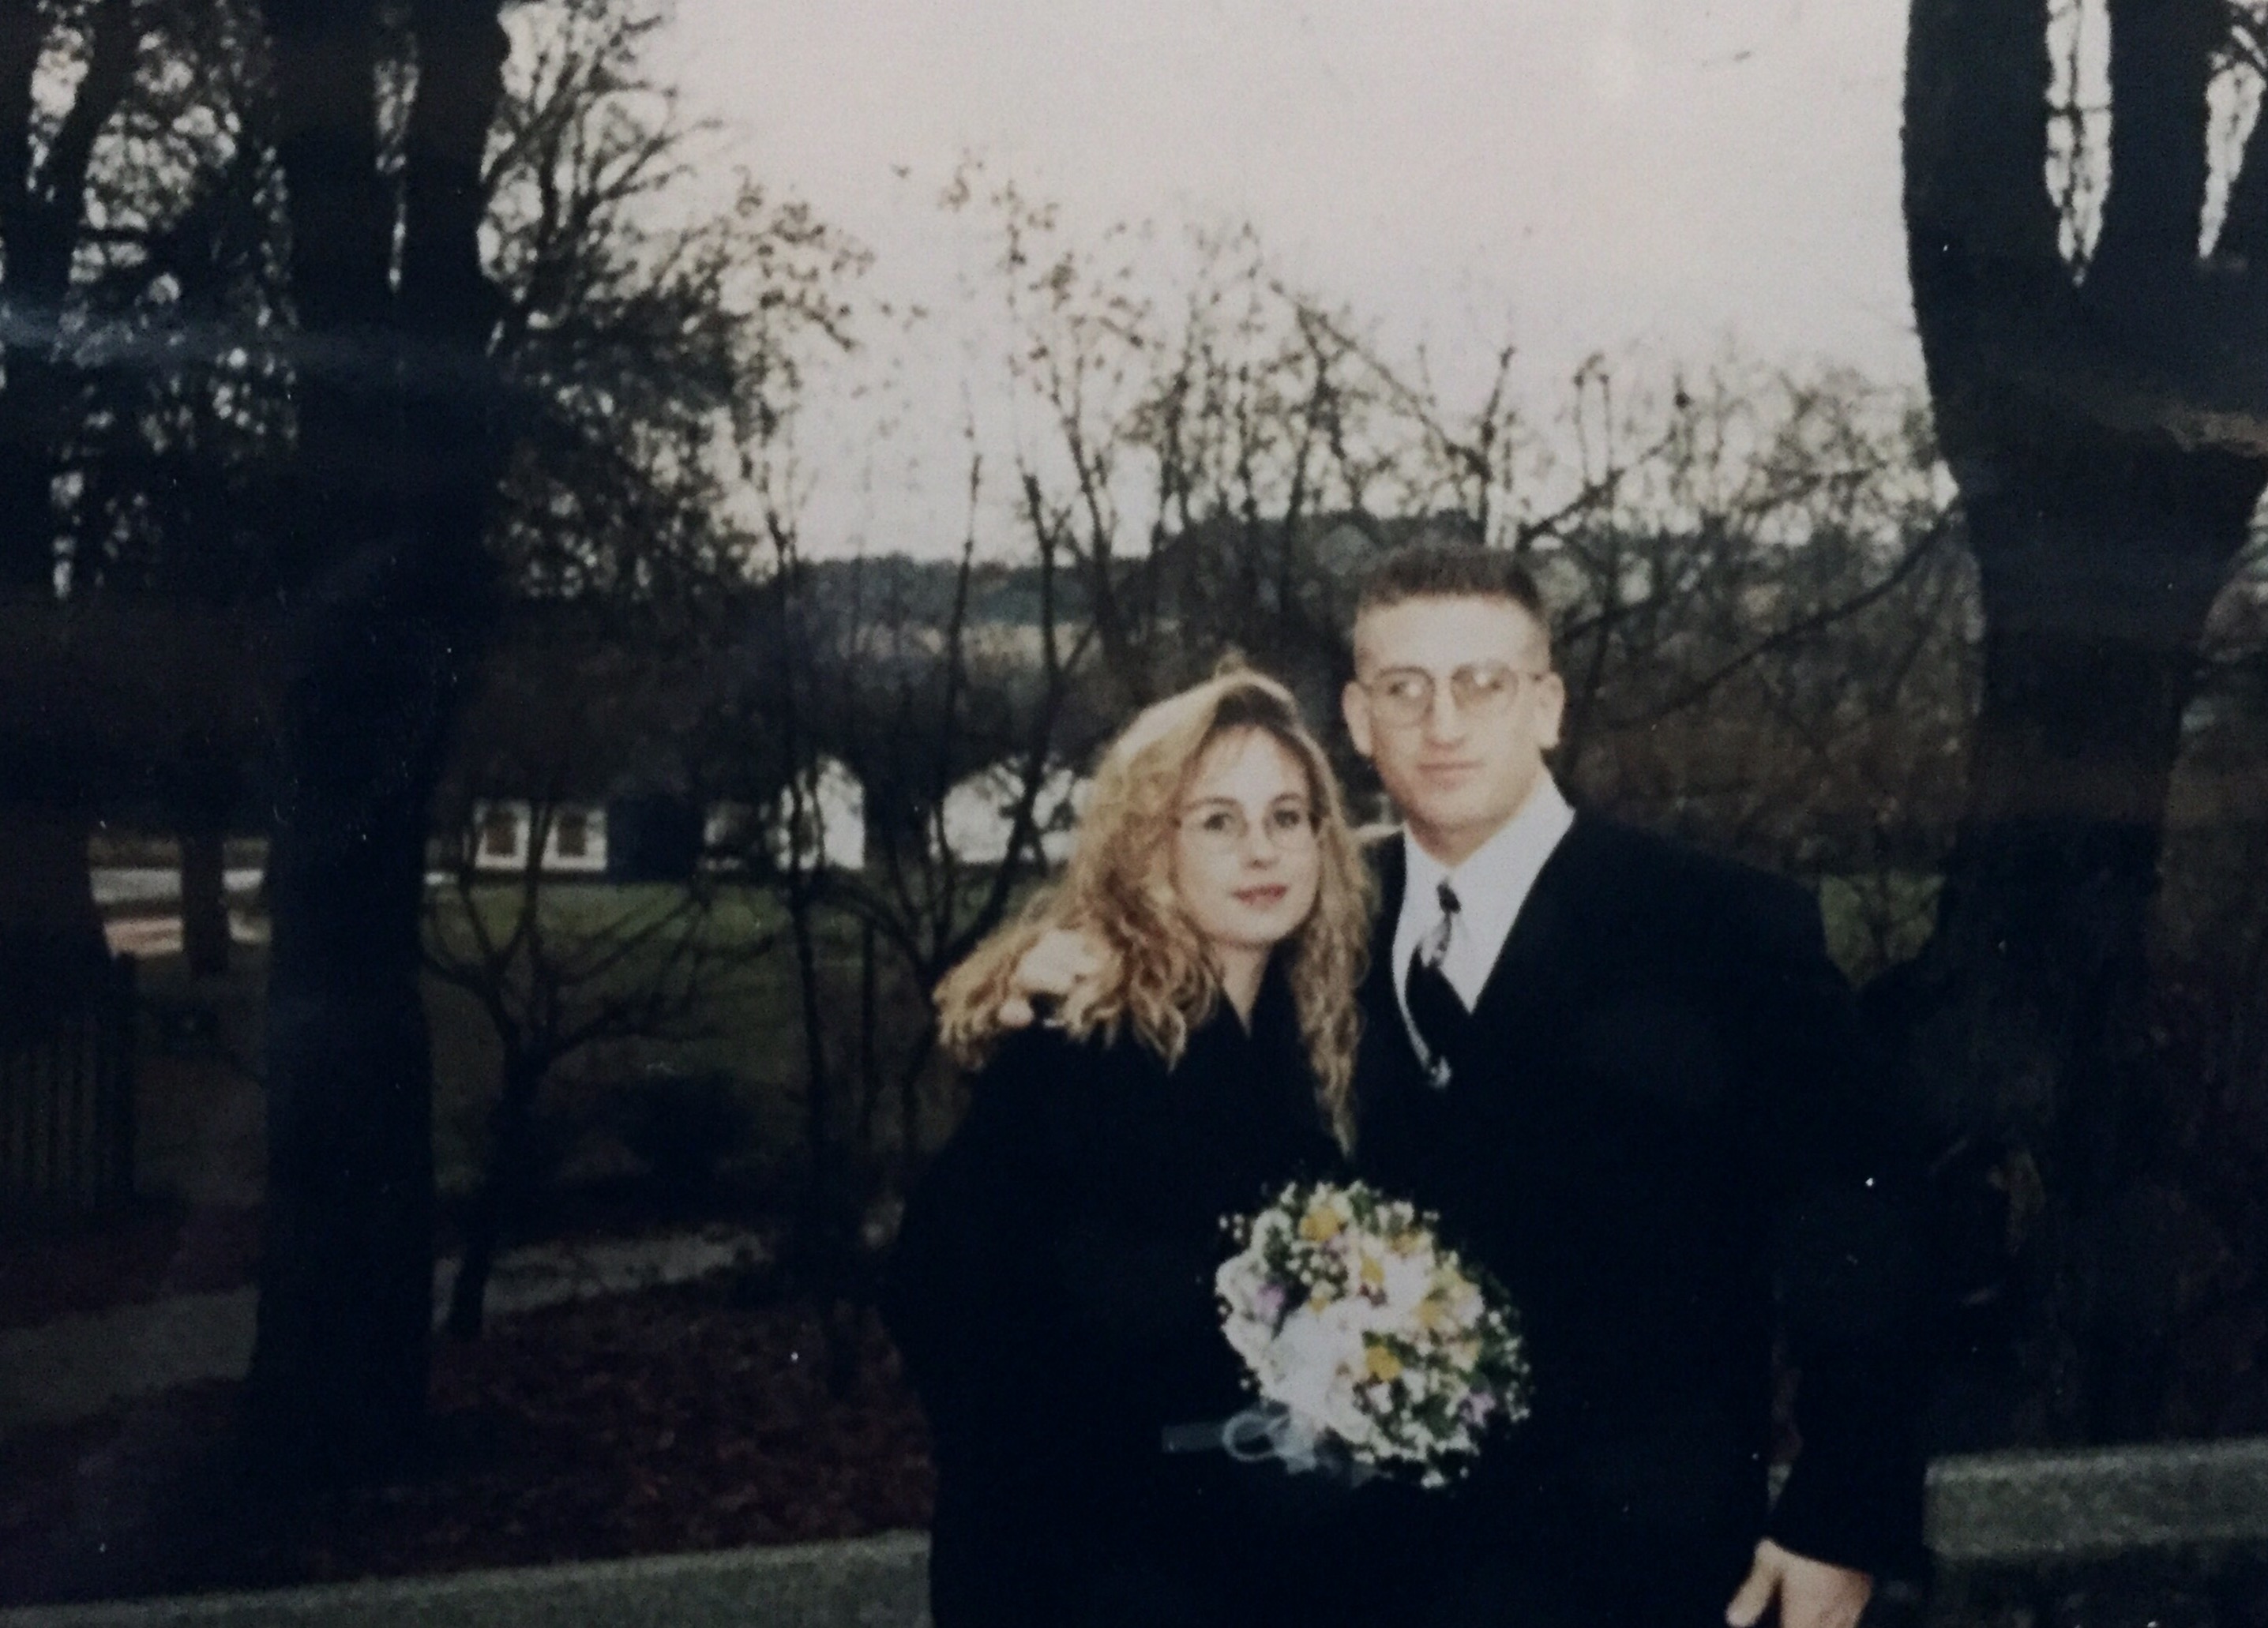 Taken right after Brian and Sandra got married in Germany 12/12/1995